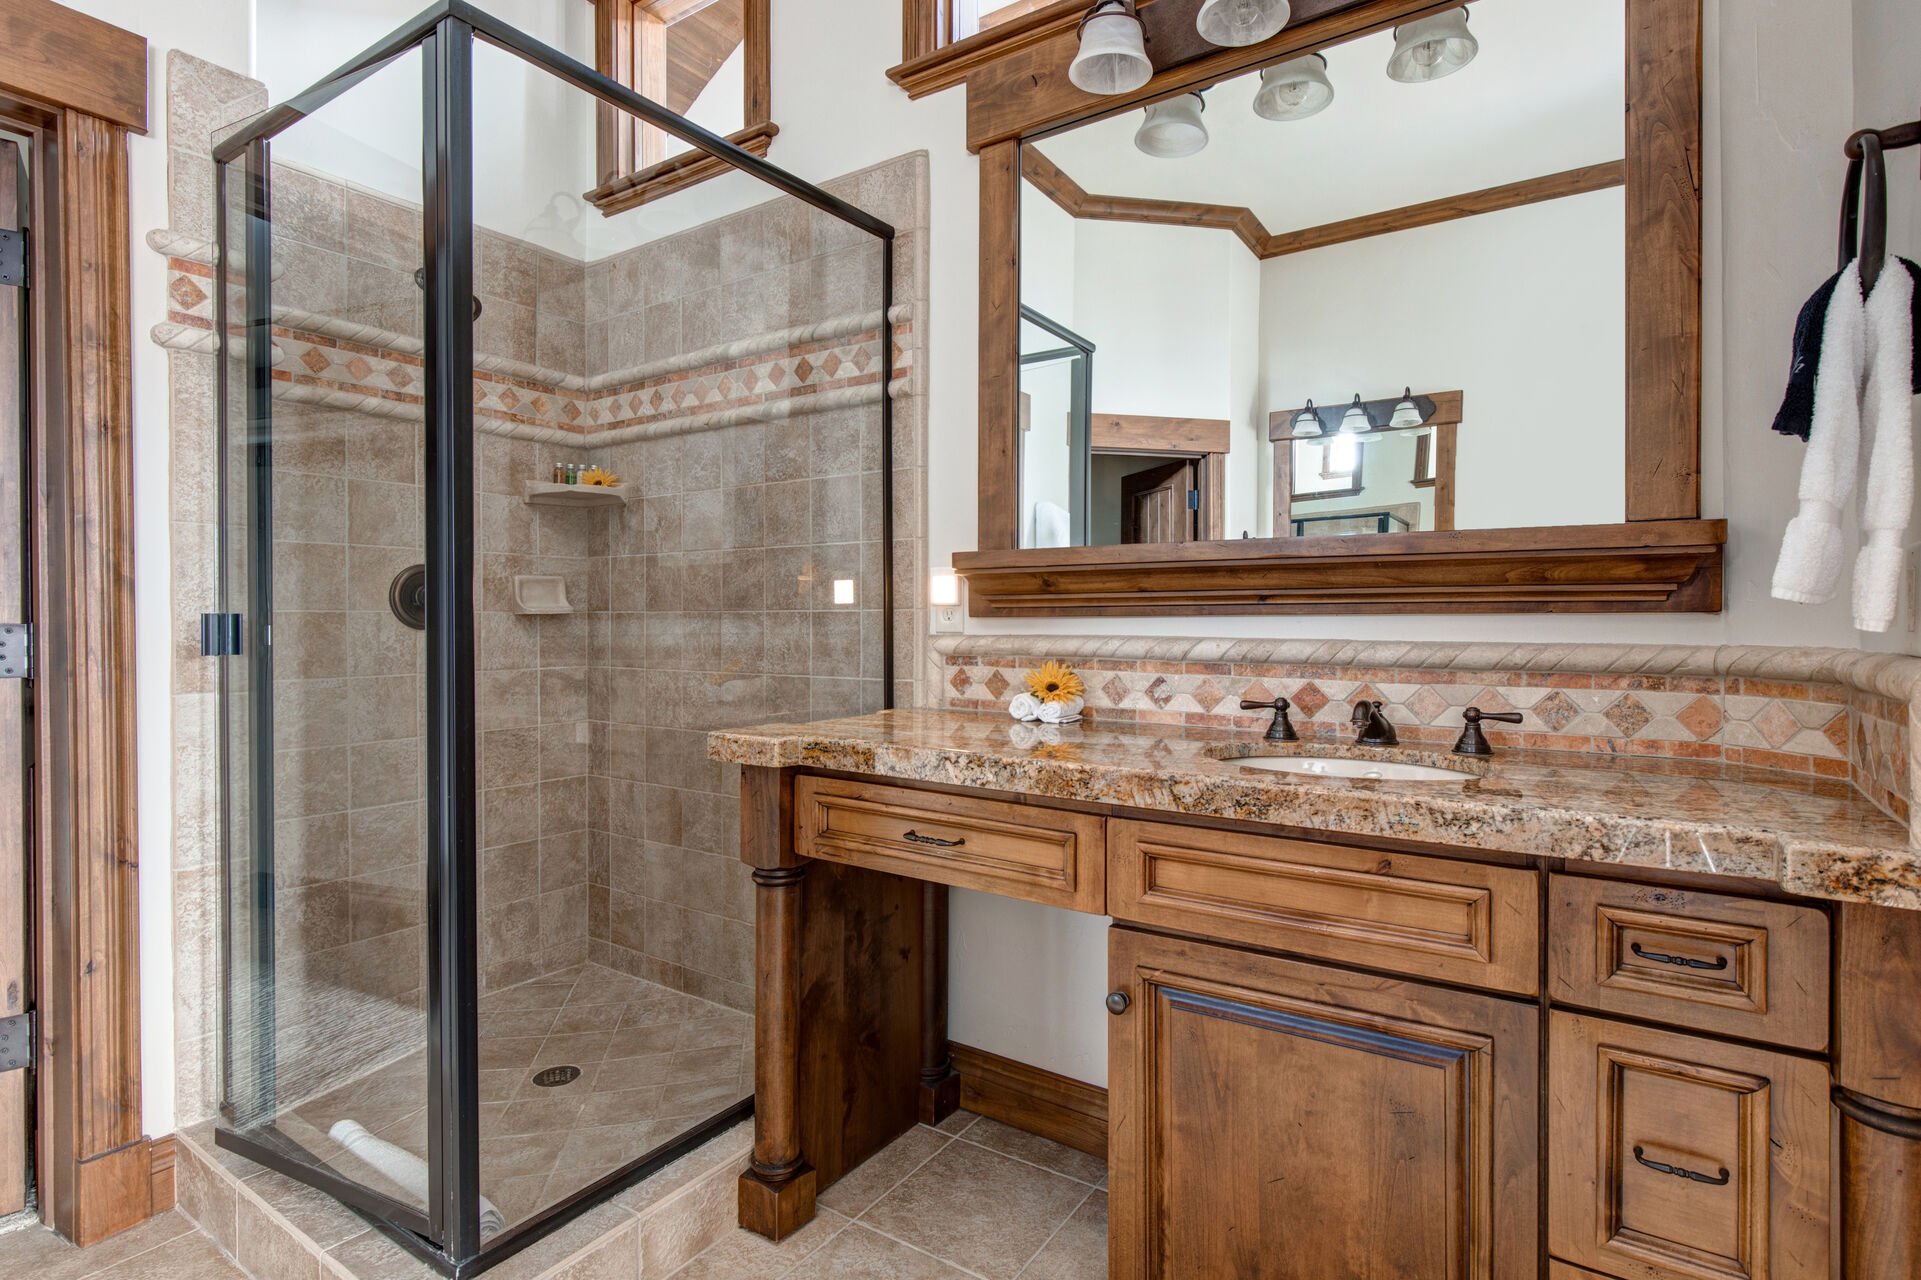 Master Bathroom with double vanities, tiled shower, walk-in closet, and jetted tub